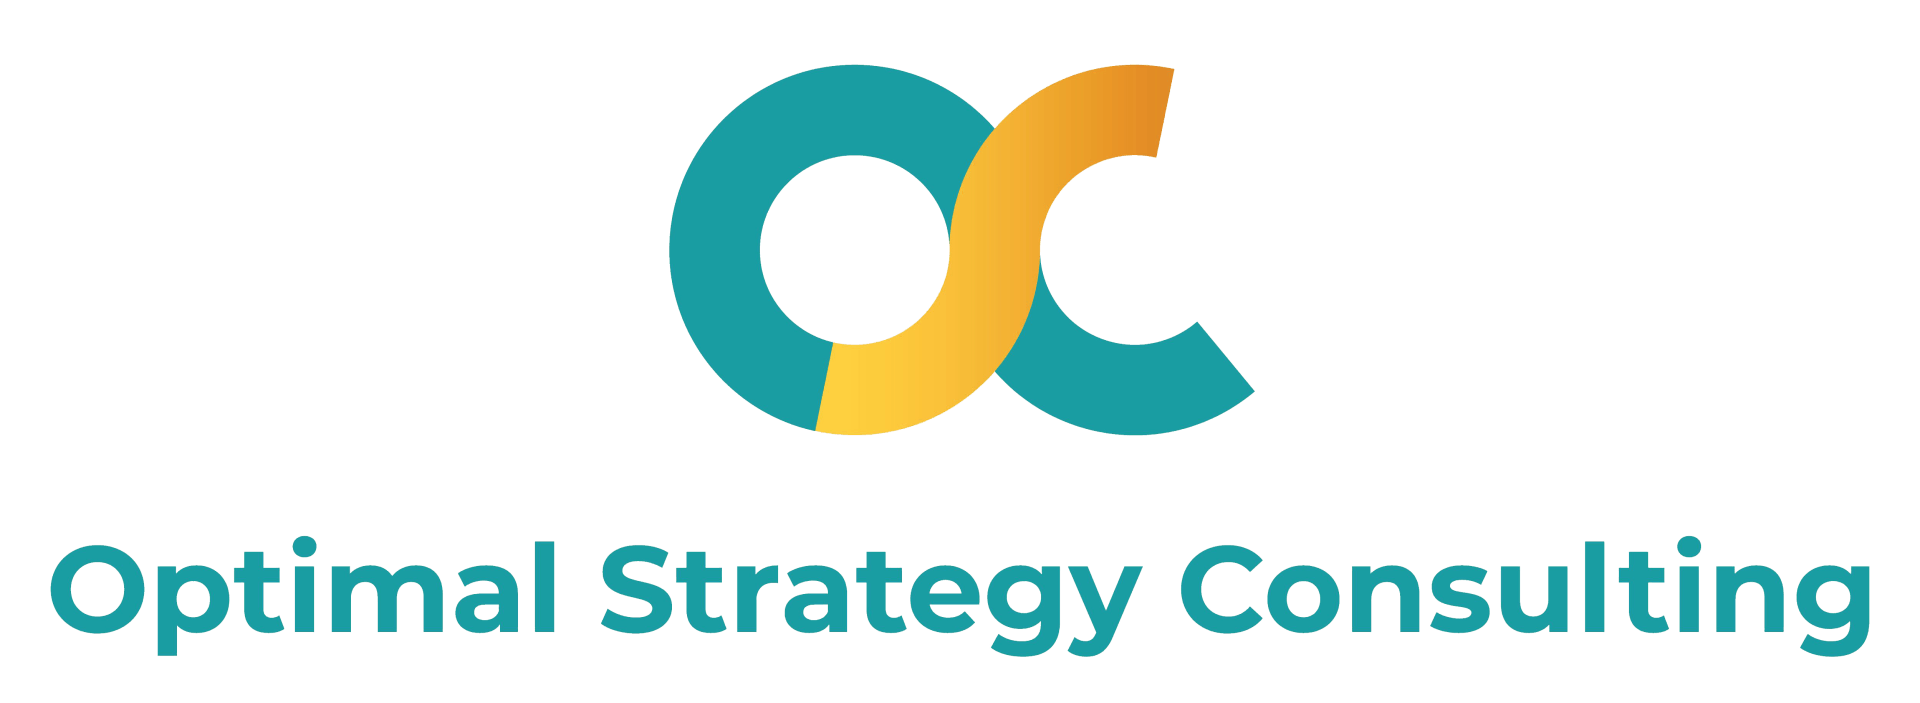 Optimal Strategy Consulting - Logo